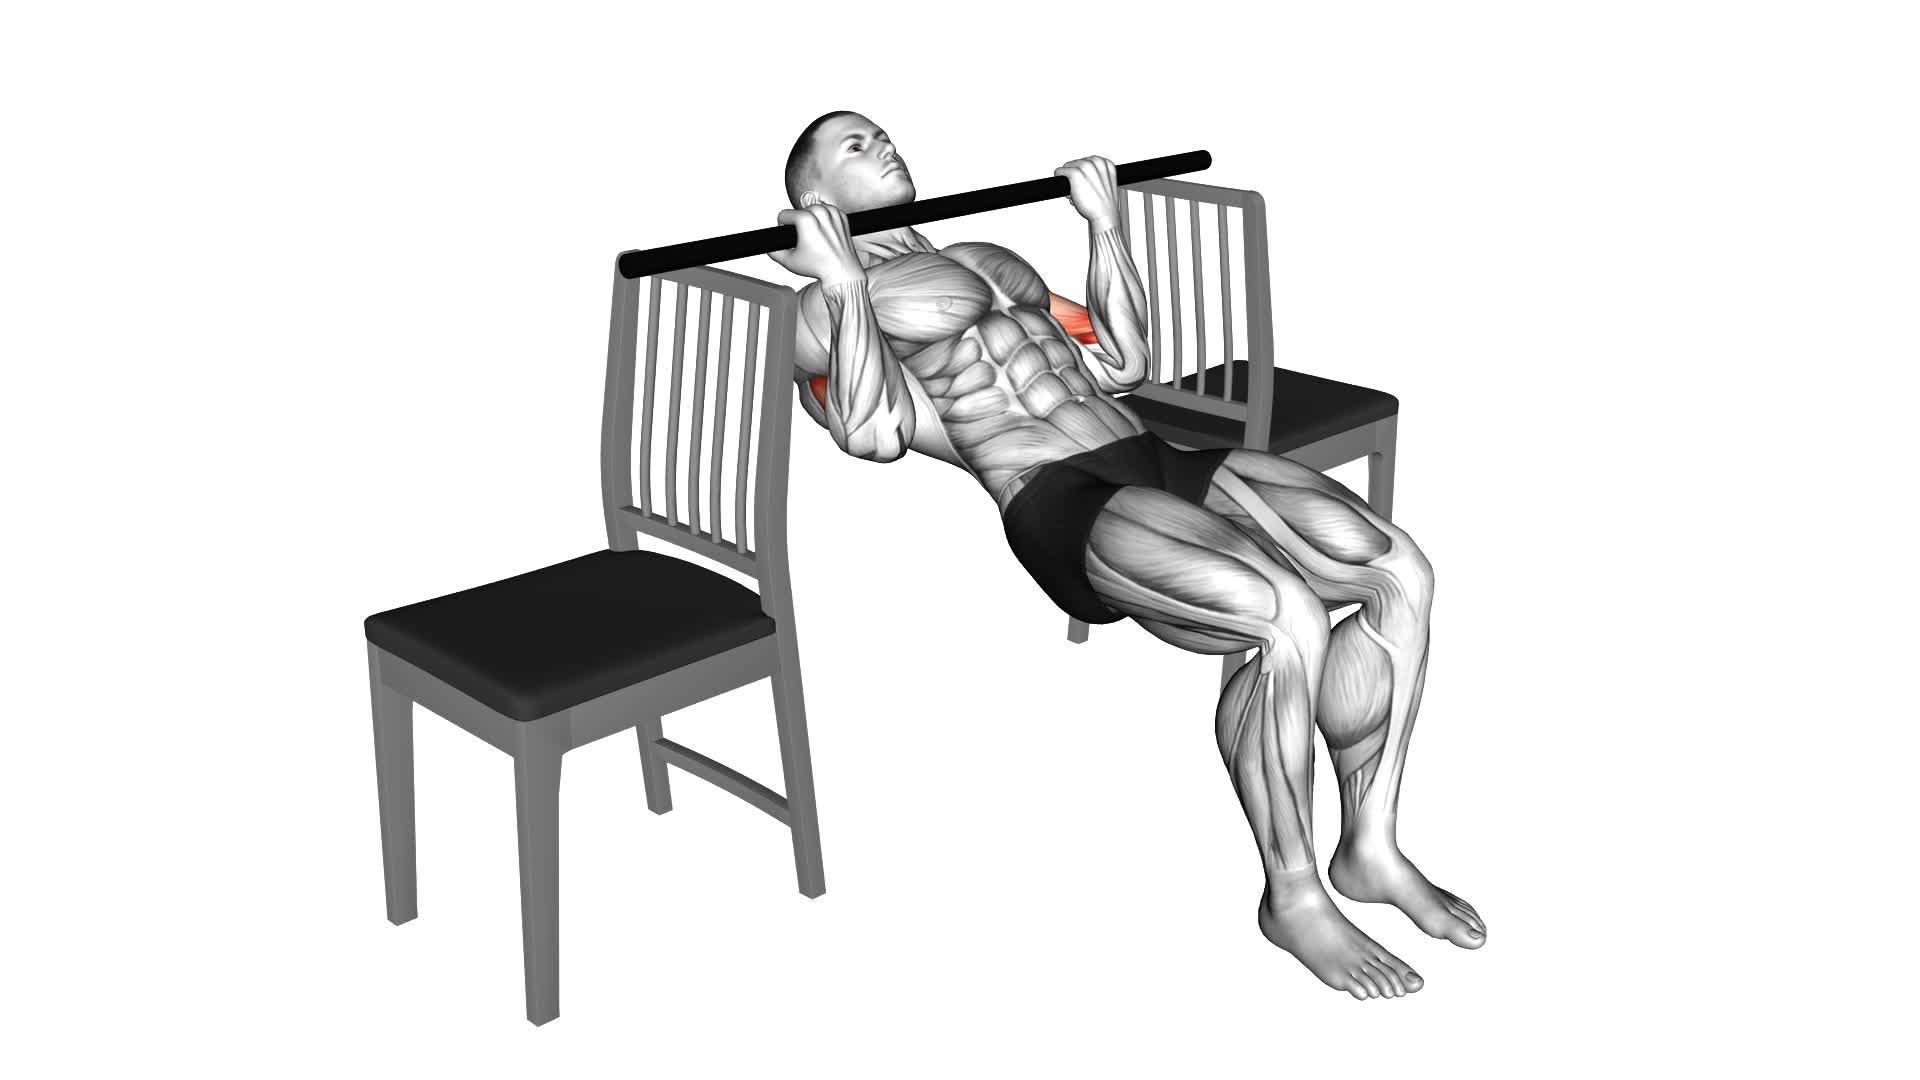 Inverted Chin Curl With Bent Knee Between Chairs - Video Exercise Guide & Tips